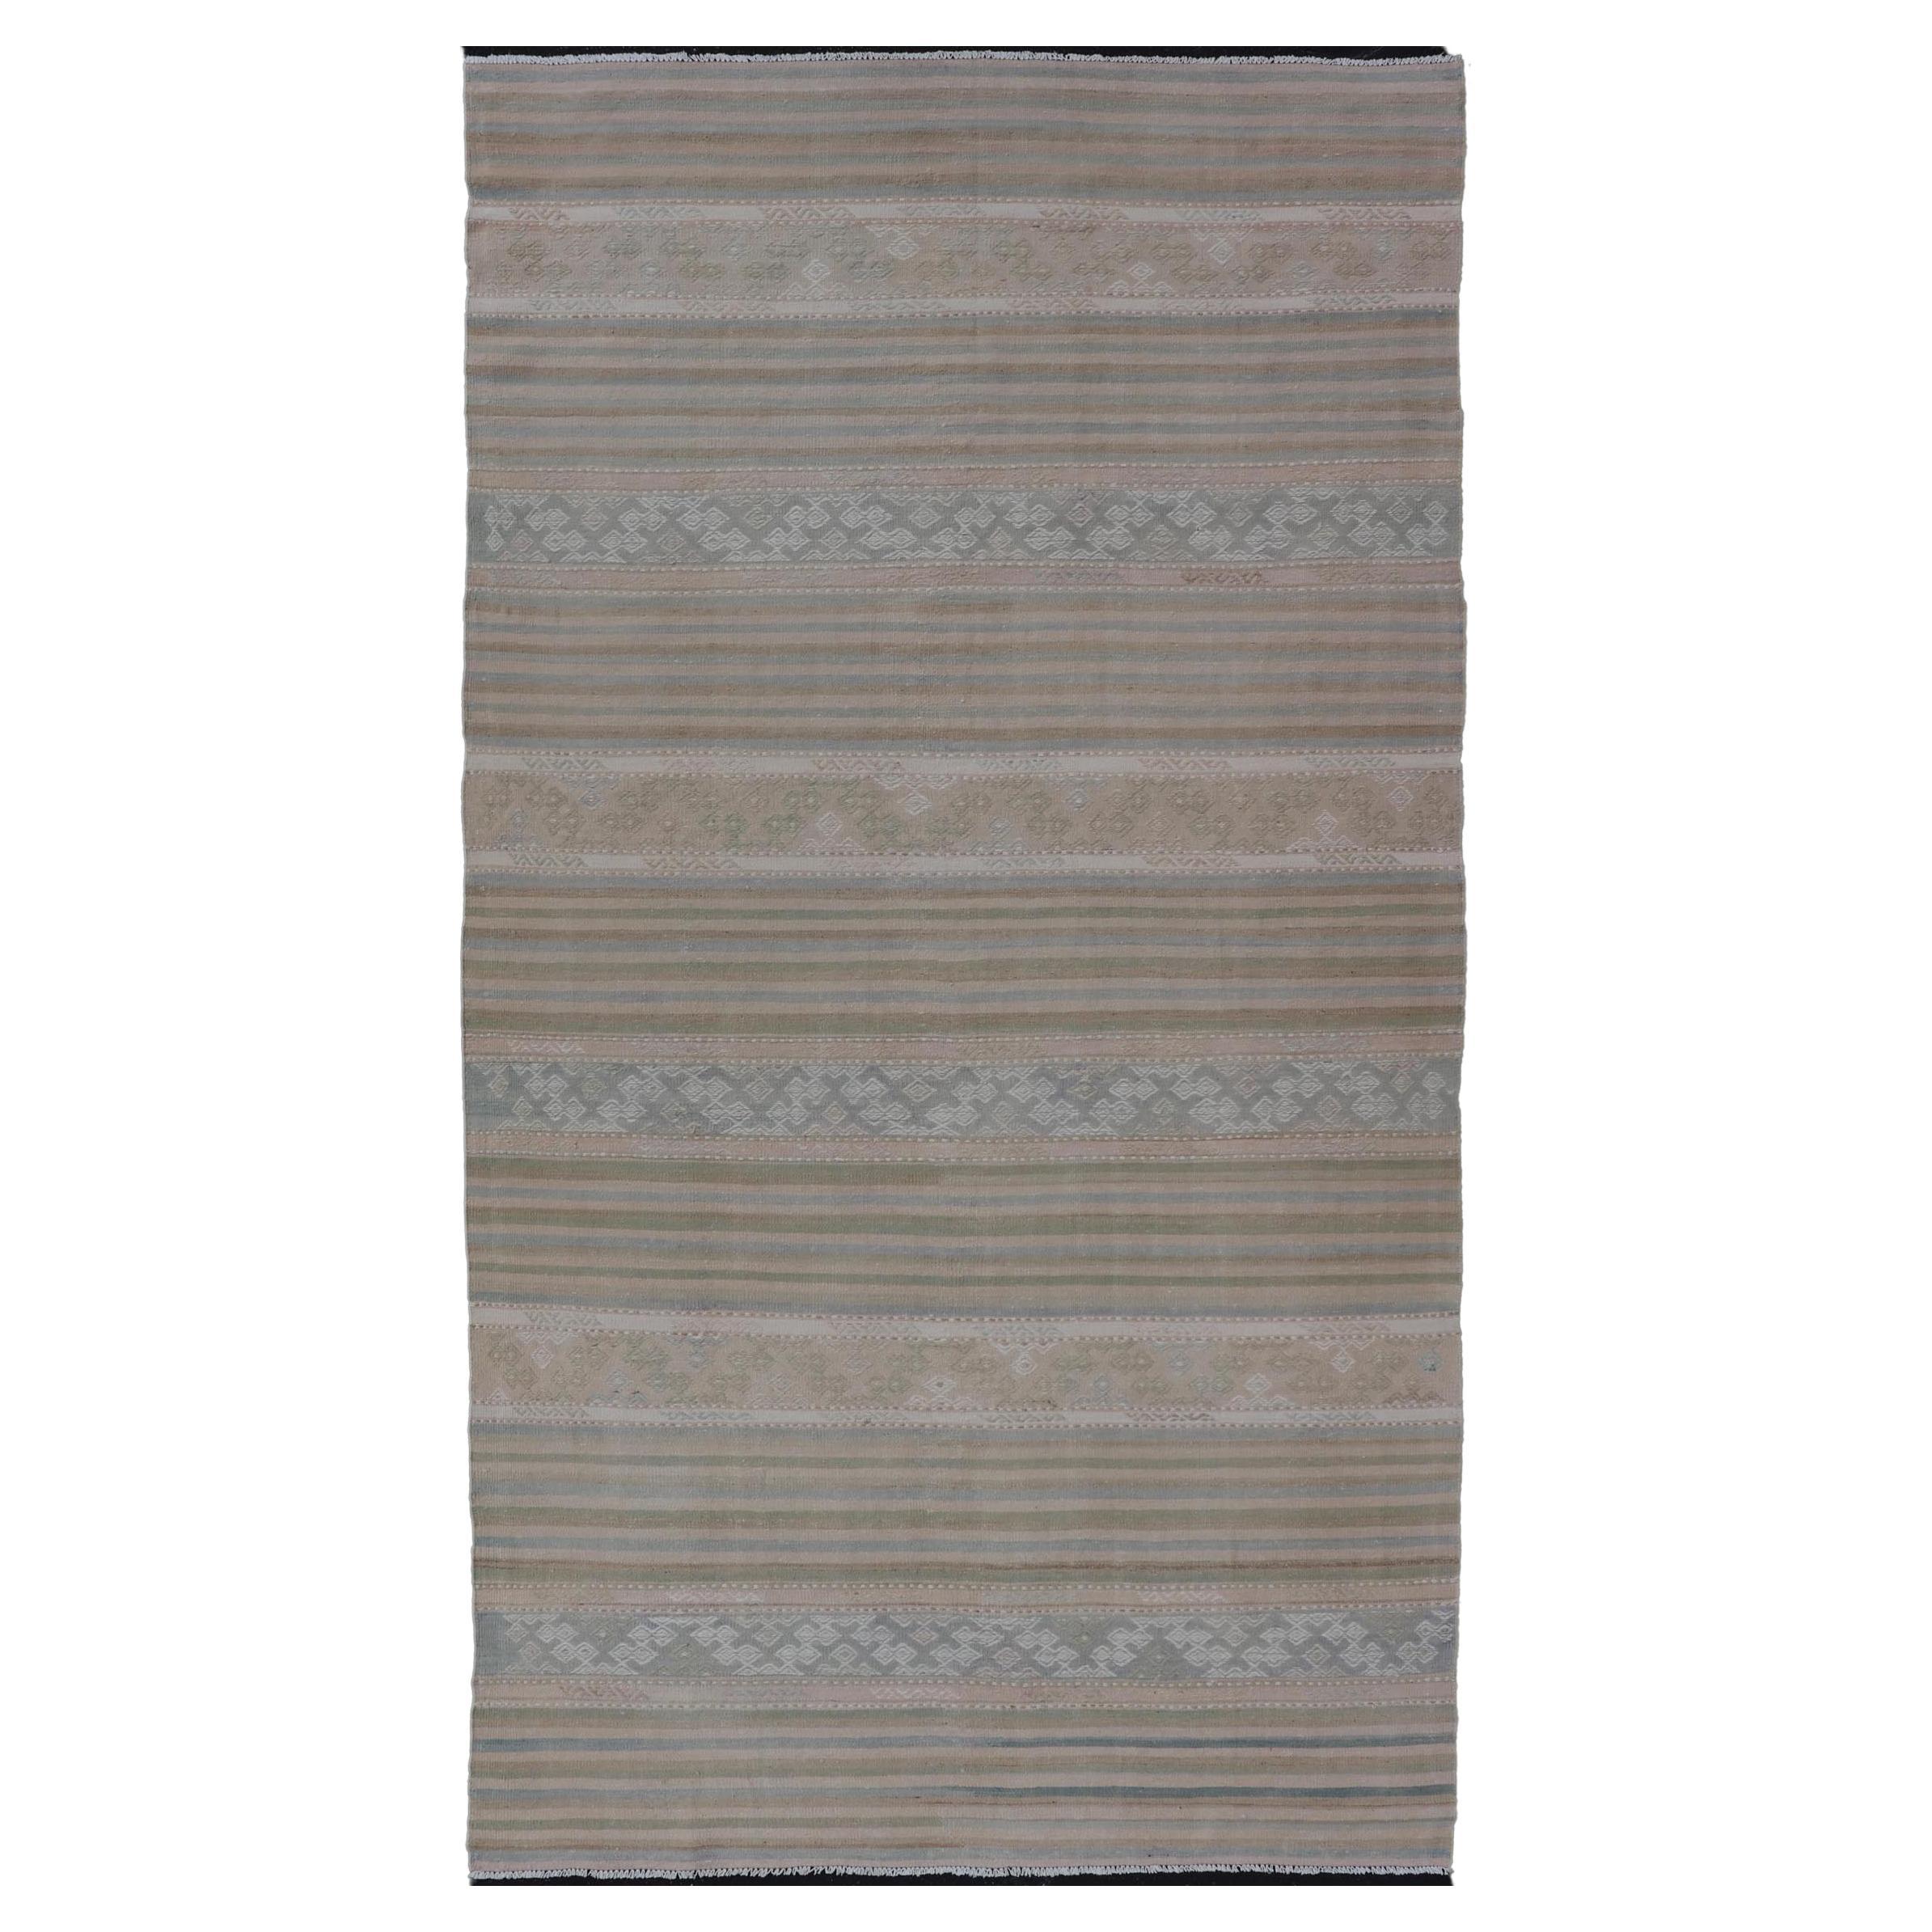 Turkish Gallery Flat-Weave Kilim in Muted Colors with Stripes and Embroideries